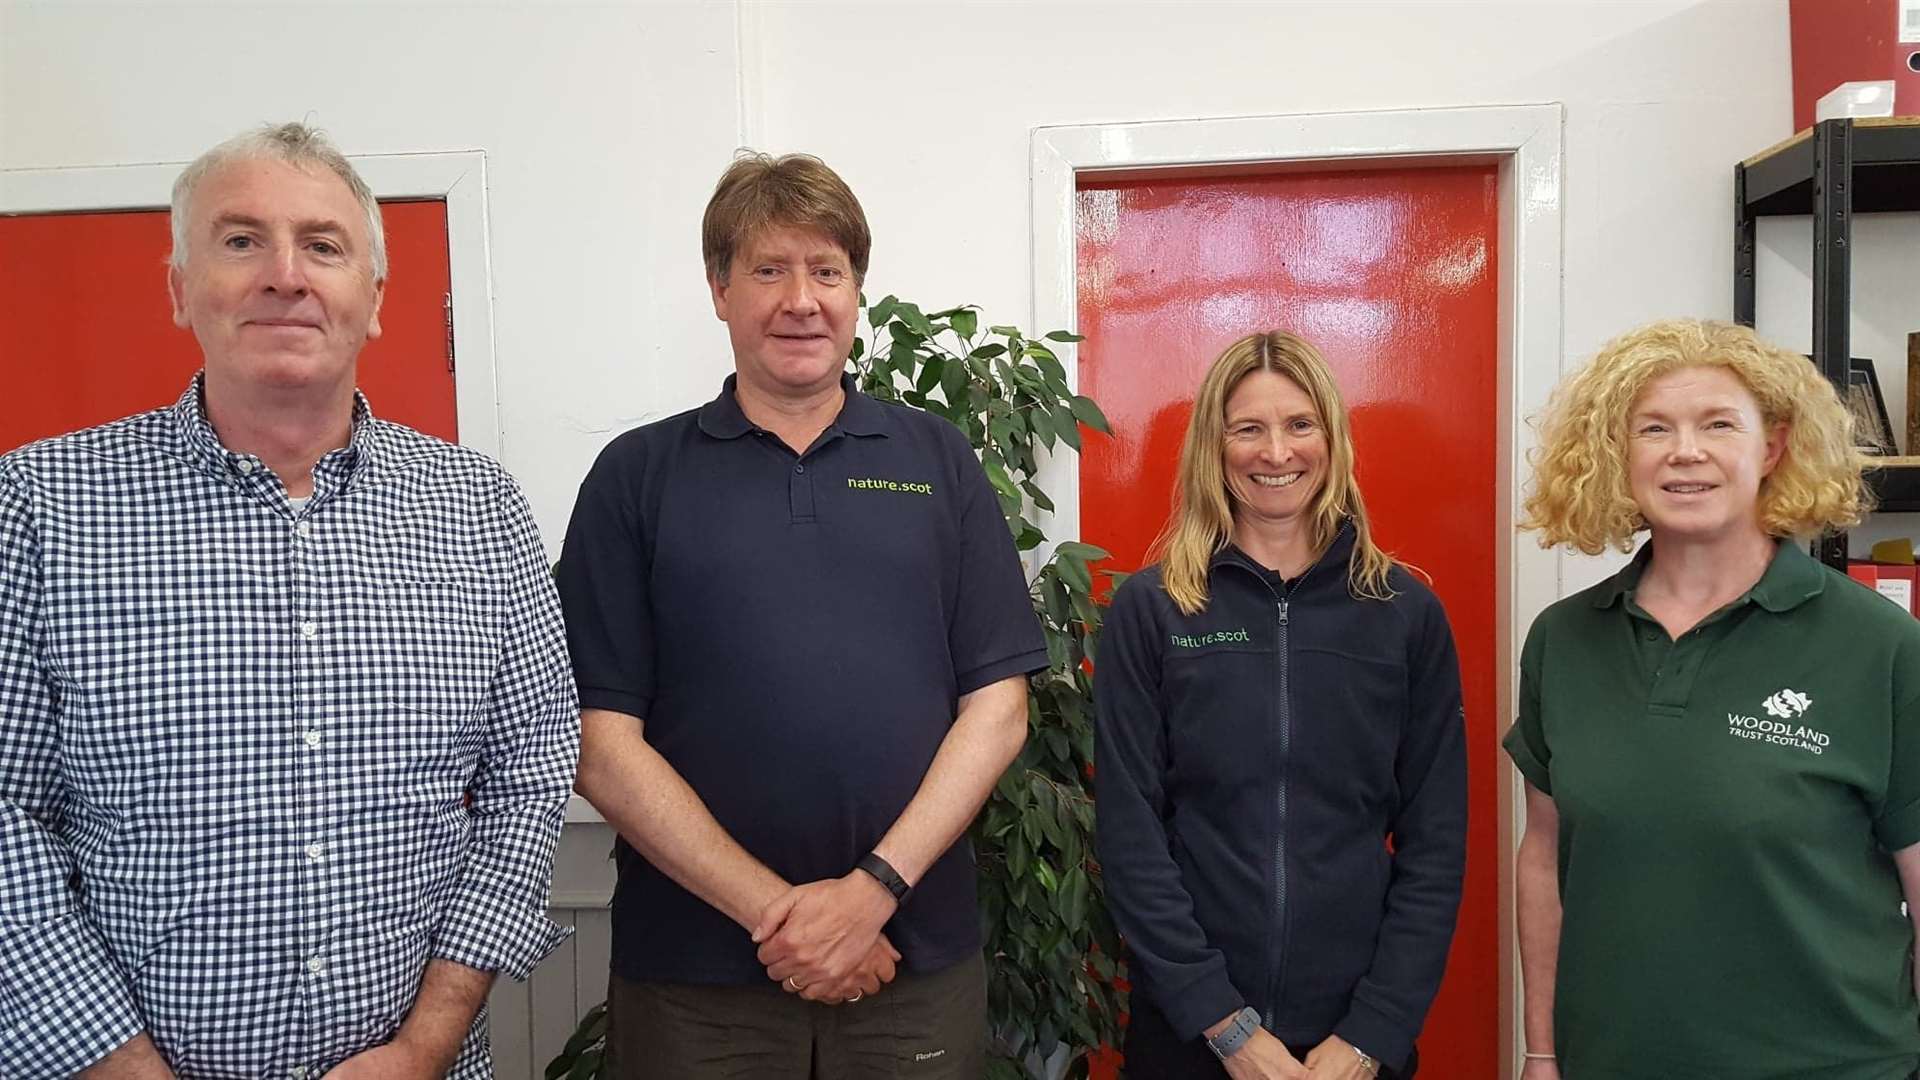 Wind farm developer Calum MacDonald (left) and Western Isles Croft Woodland project officer Viv Halcrow (right) meeting David Maclennan (second left), SNH area manager for Argyll and Outer Hebrides, and Francesca Osowska, SNH chief executive, in the offices of Point and Sandwick Trust.